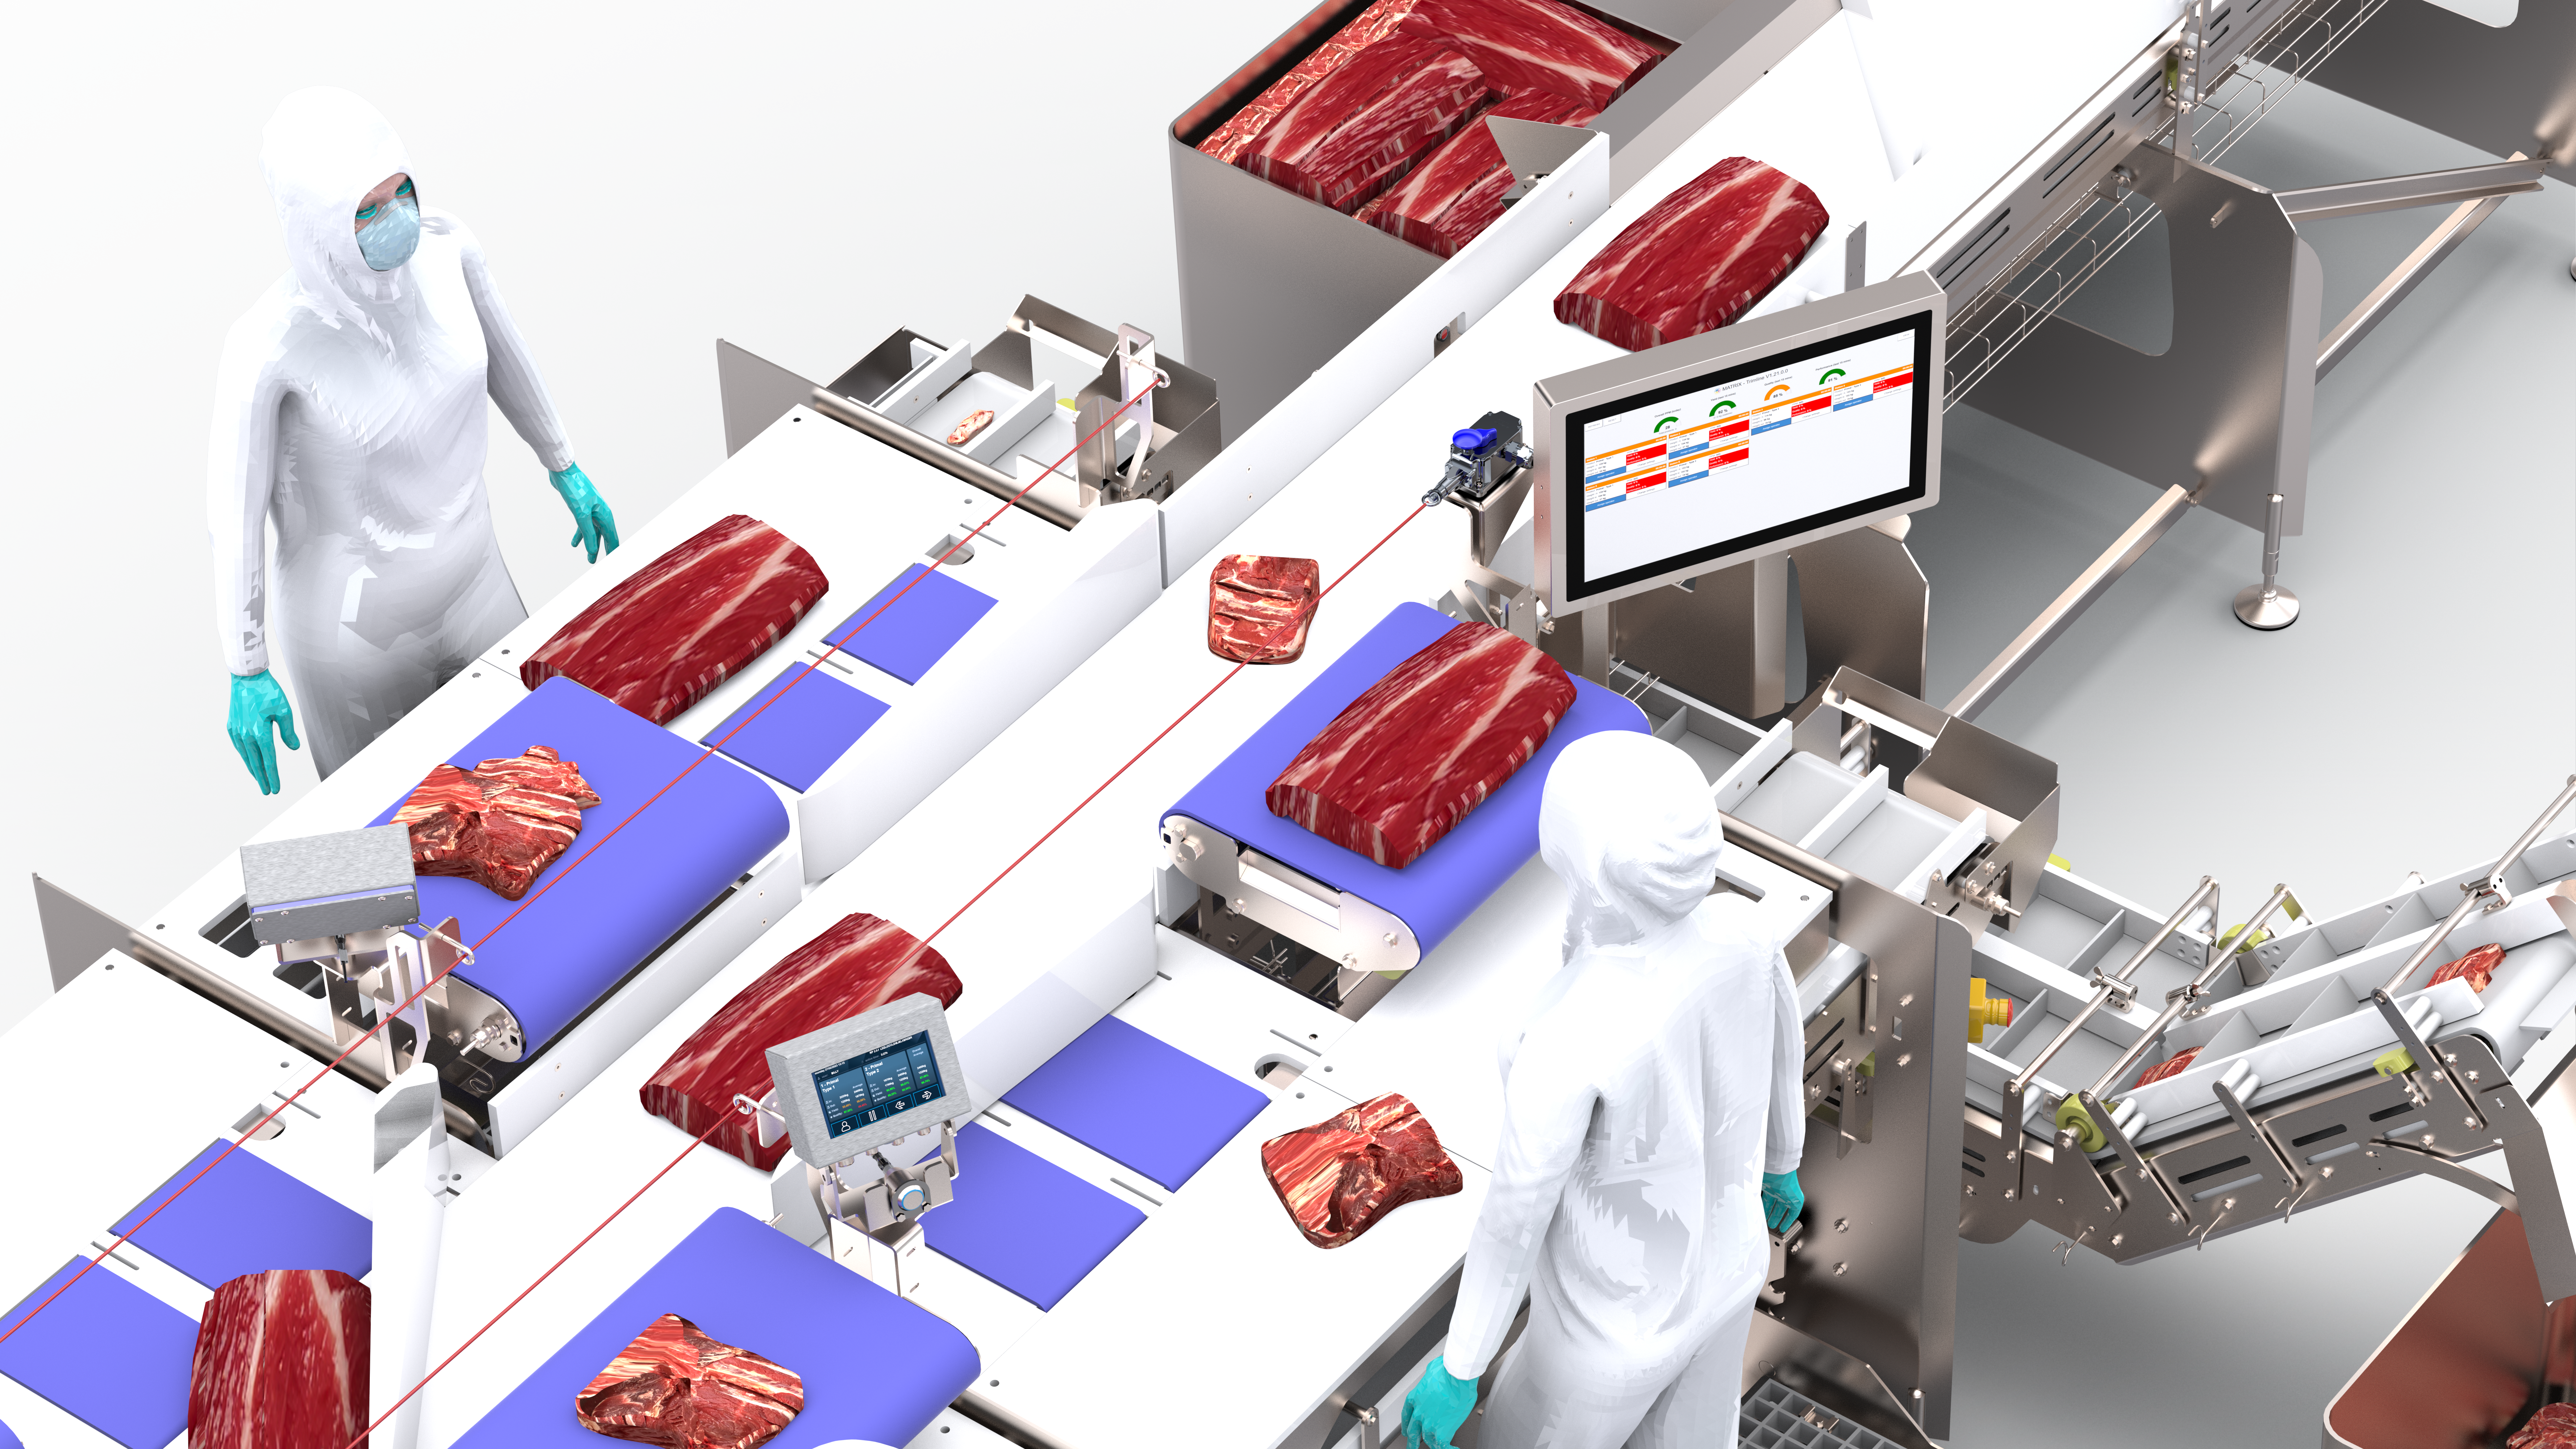 Intelligent meat trim line monitoring of live yield, capacity and quality per operator